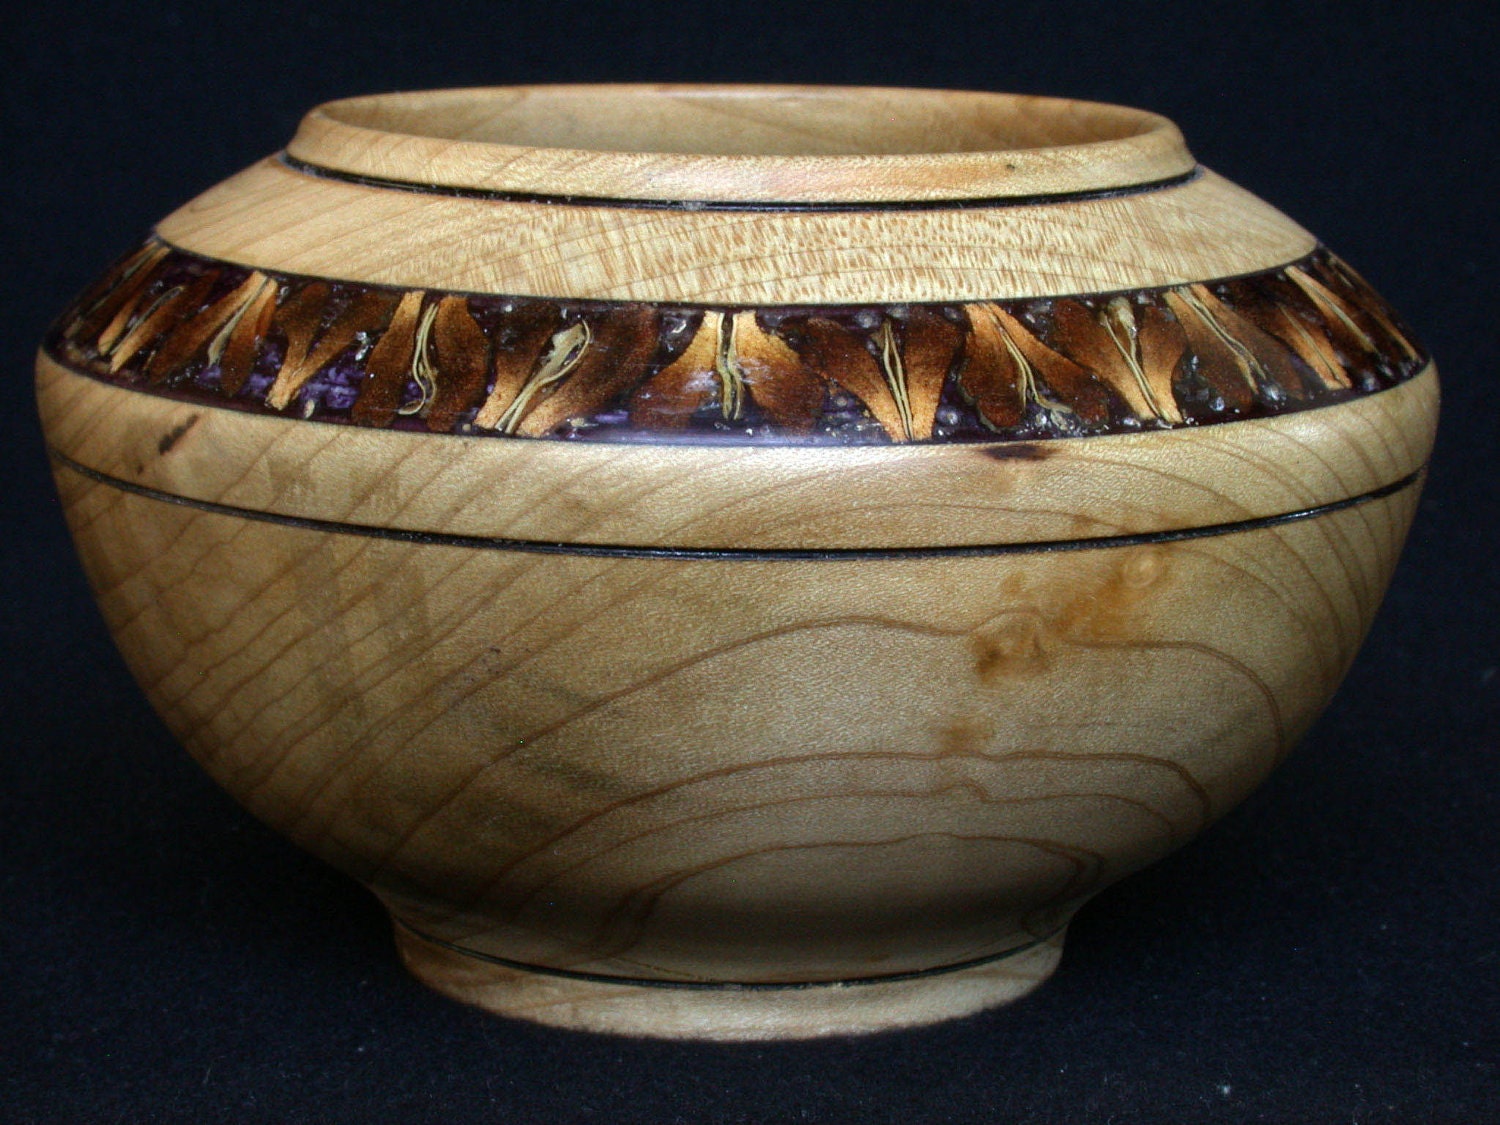 LV-383 Southern Magnolia Wood Turned Vase Bowl with Seed Pod